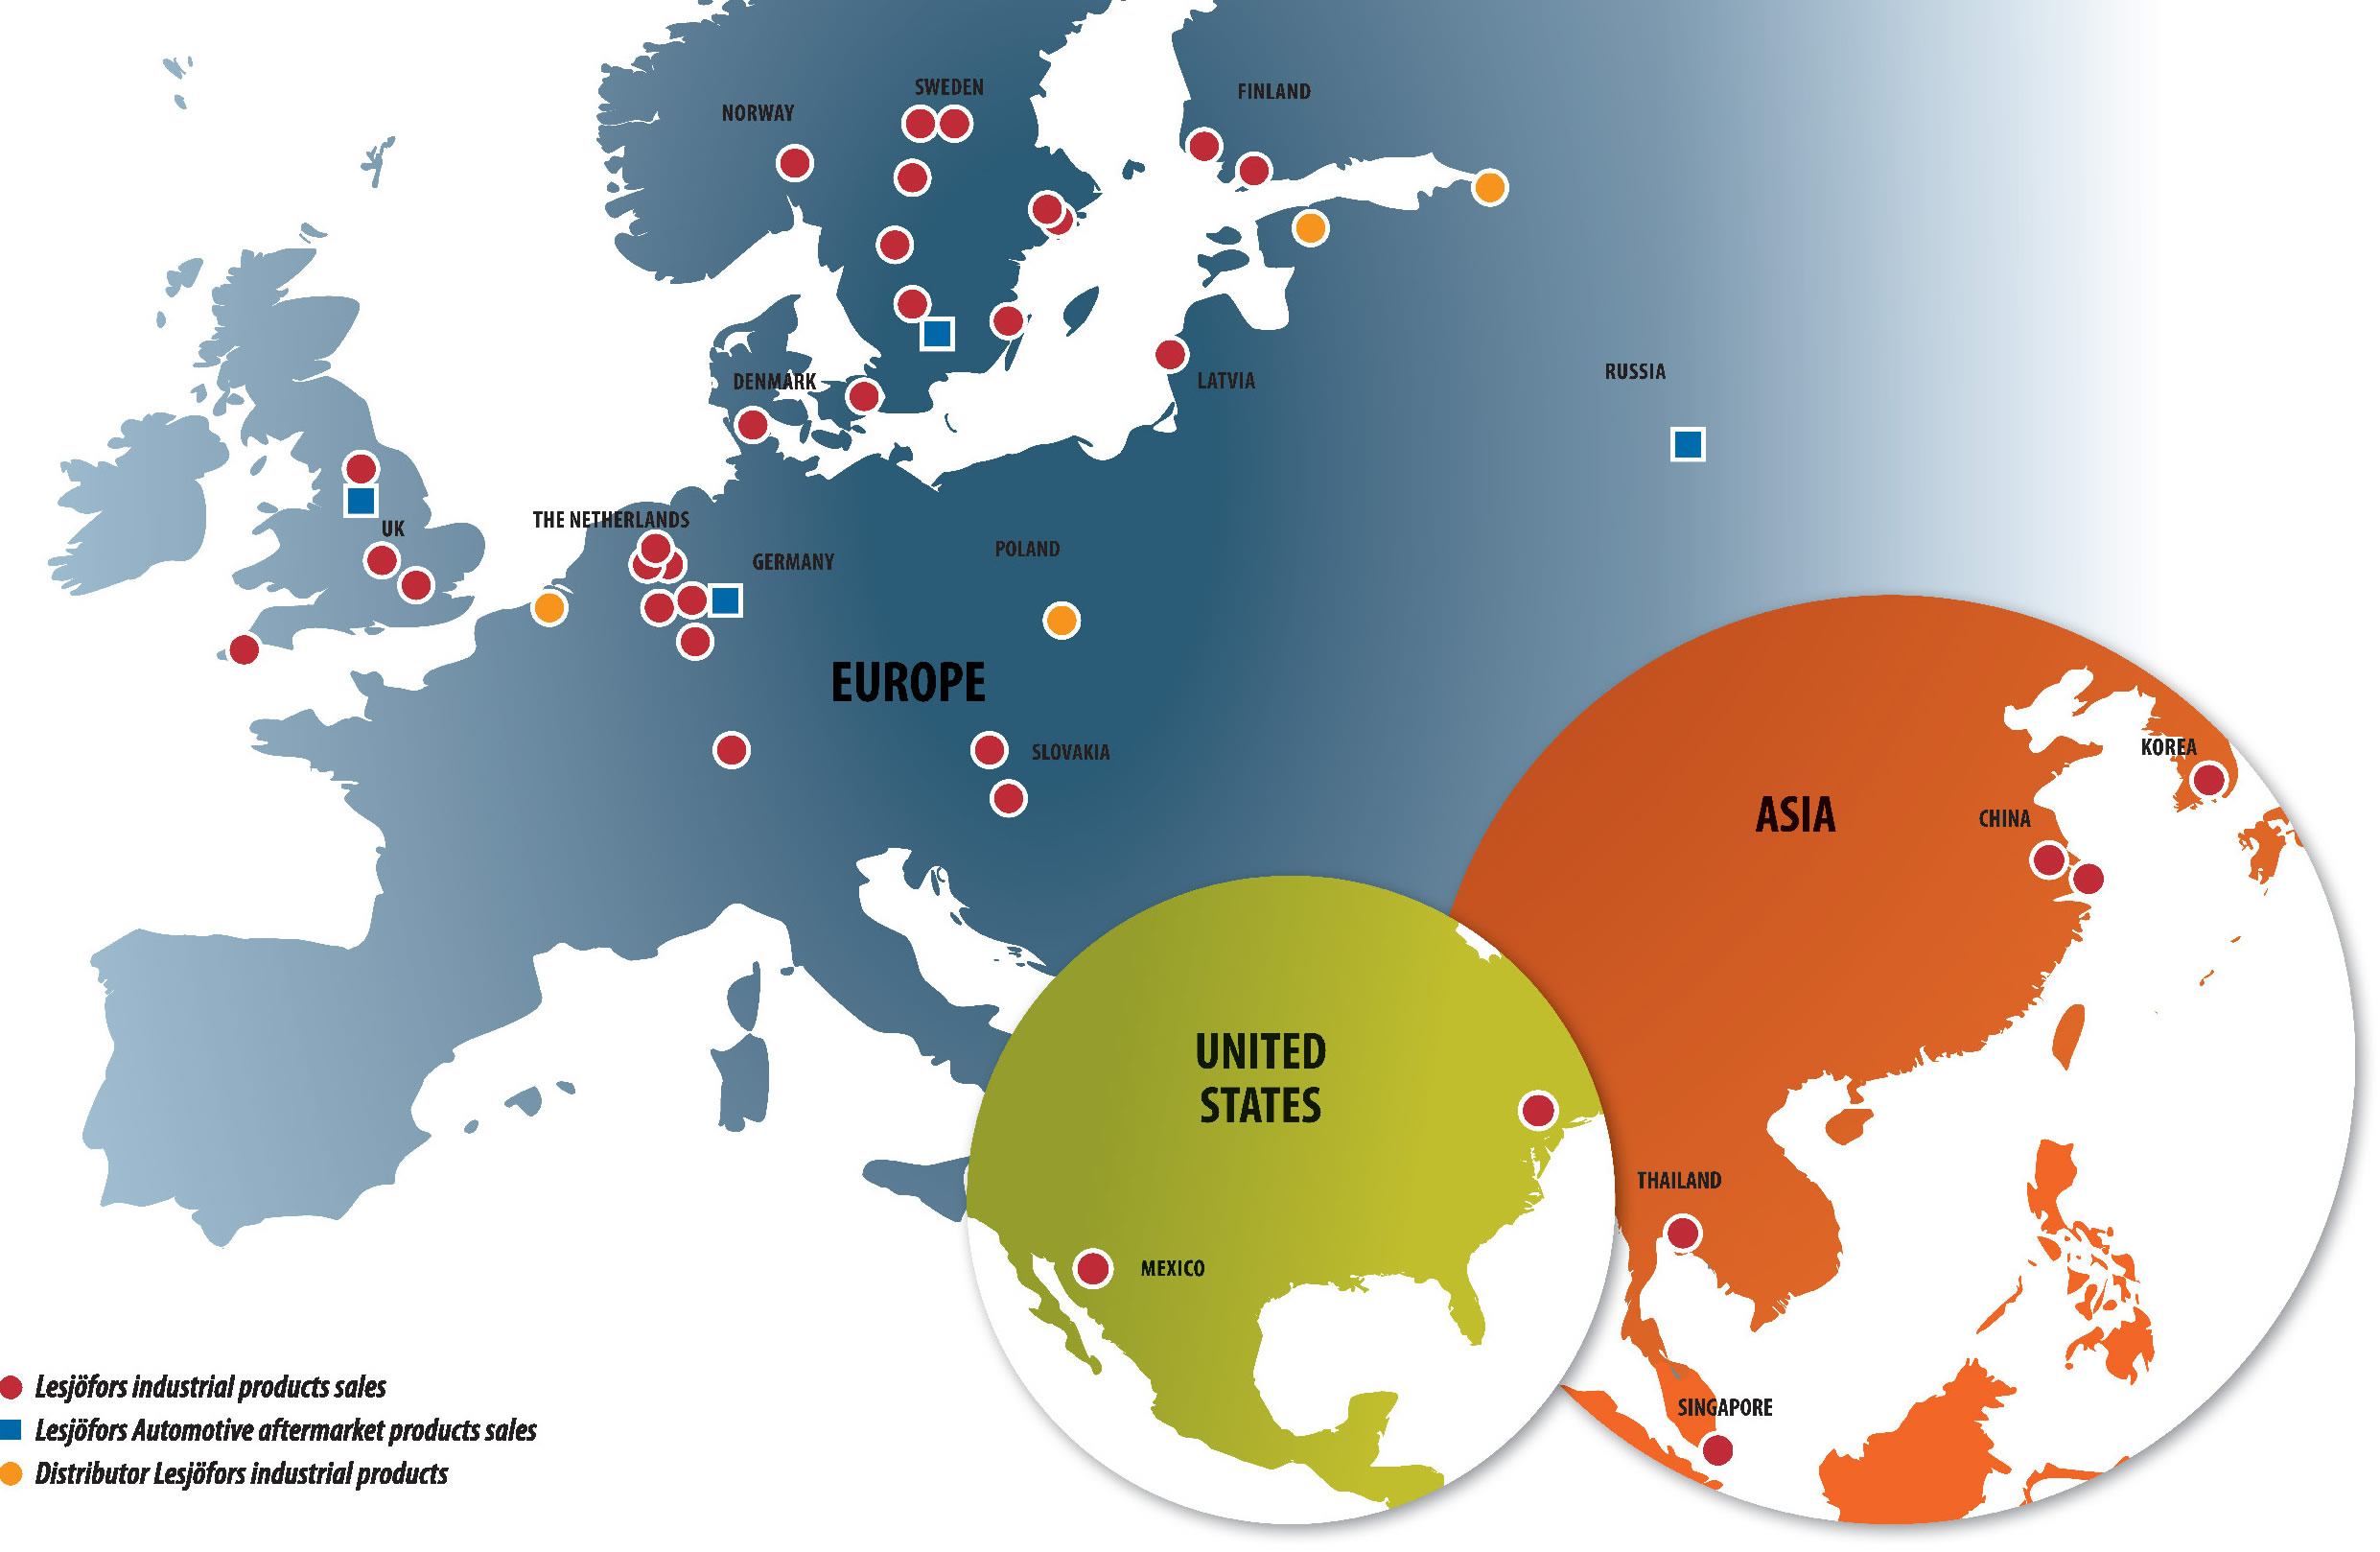 Wire spring suppliers' map of coverage, including Ireland, the UK, Europe, and the Americas